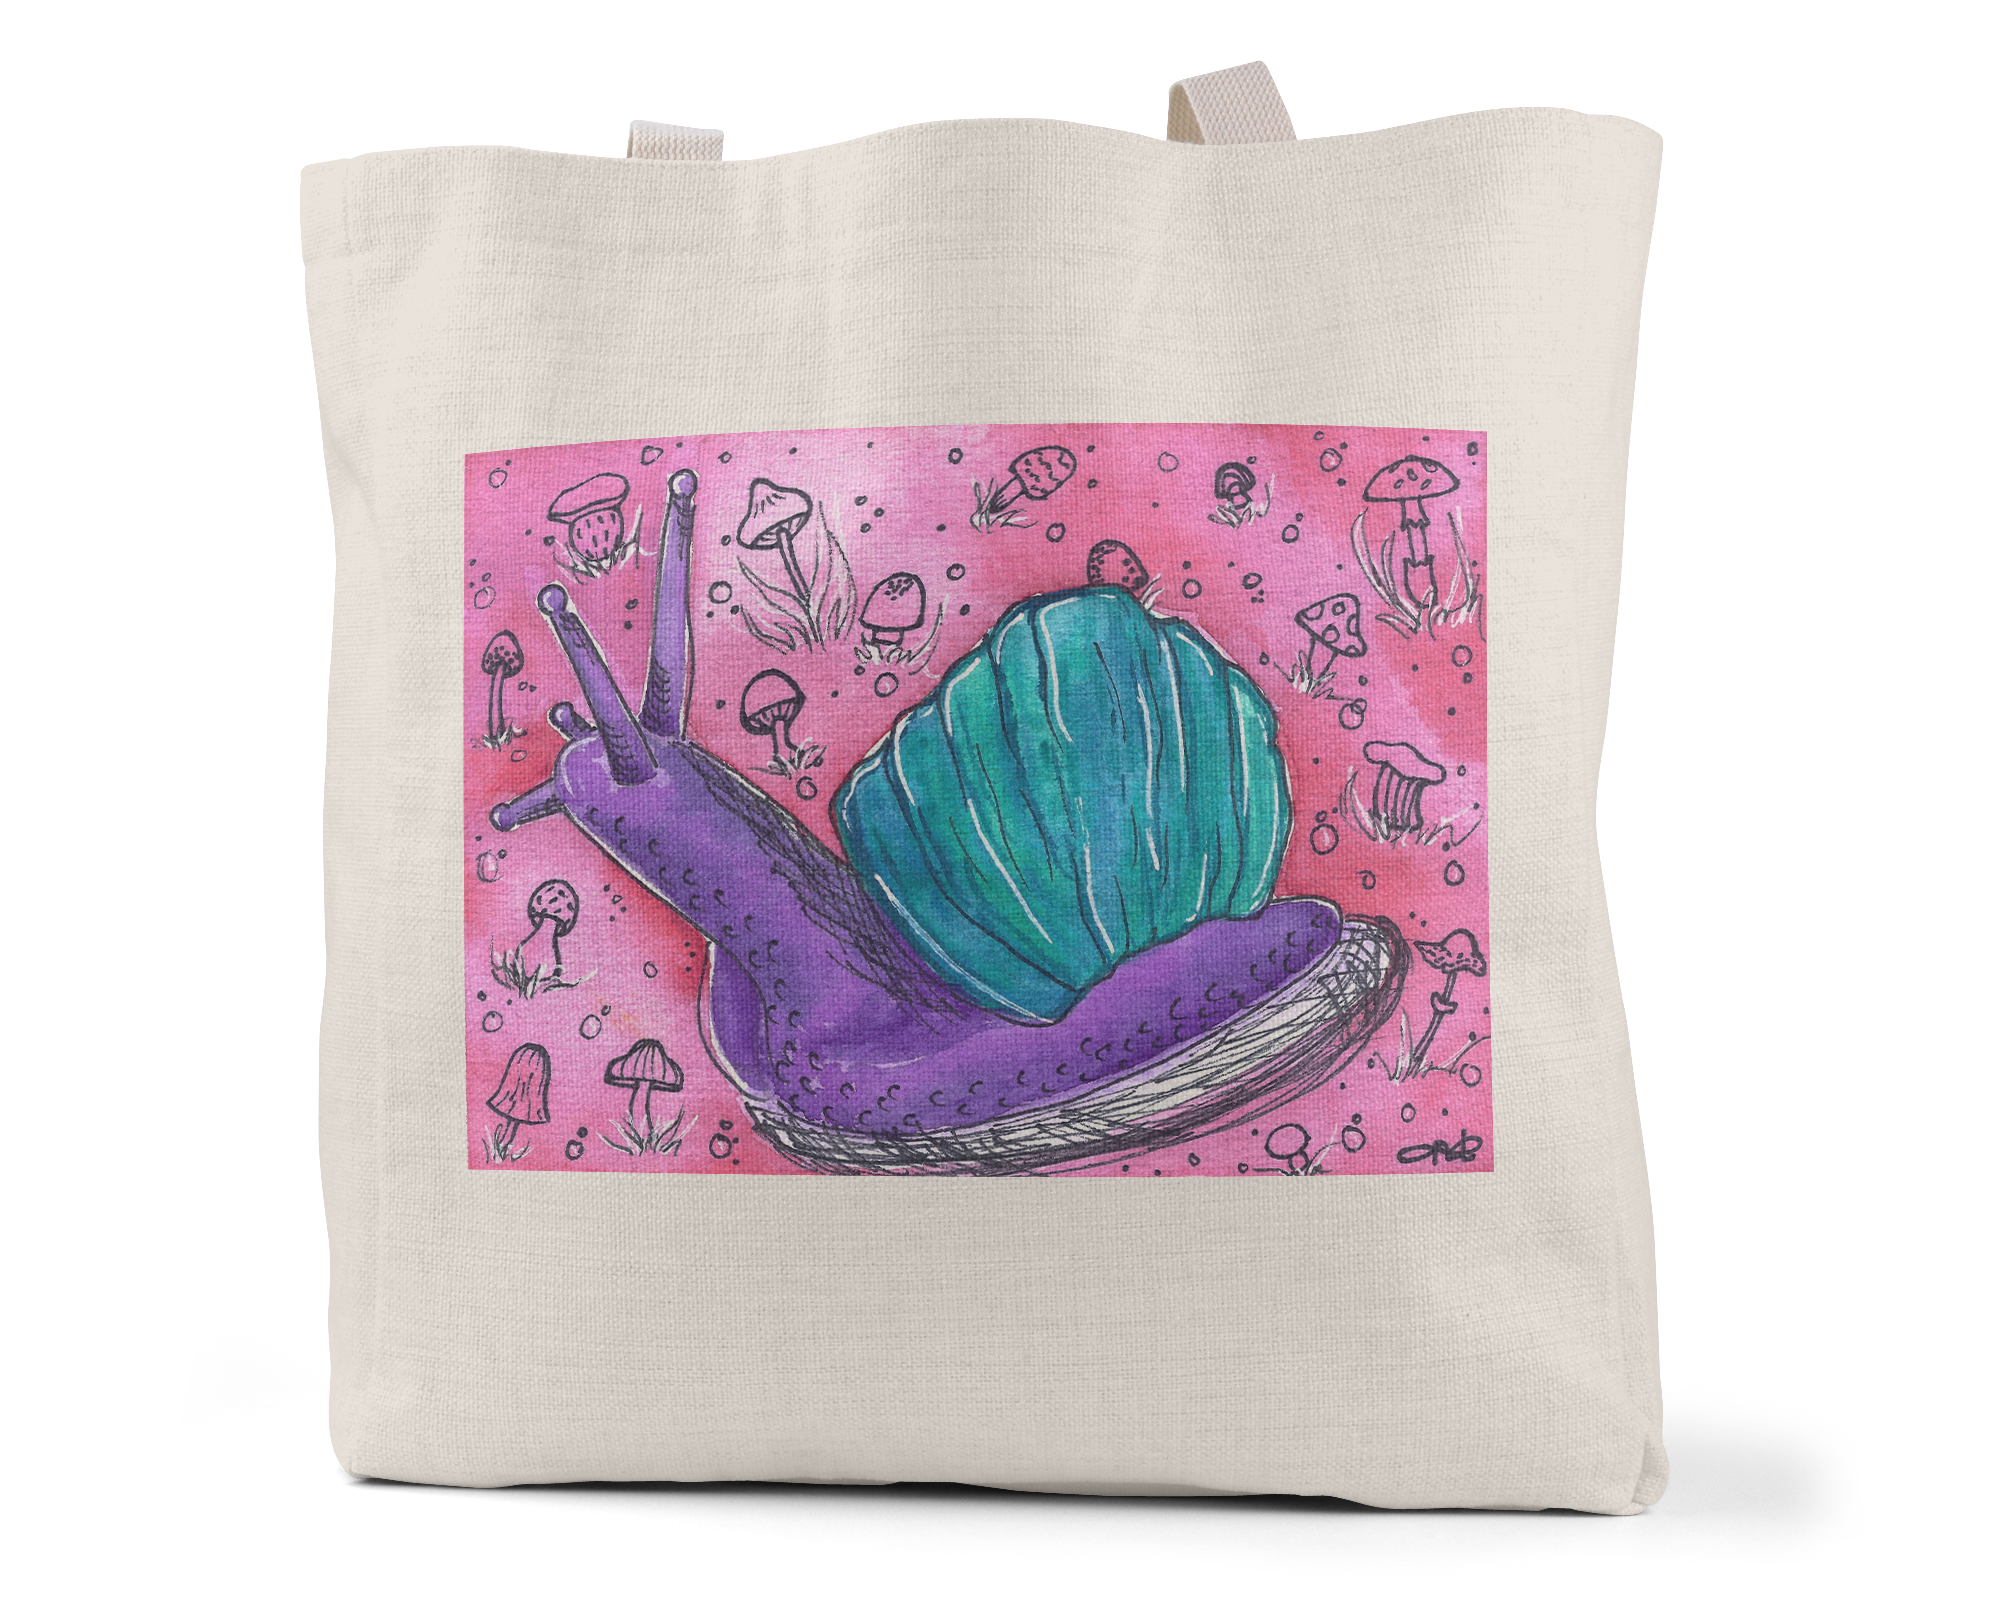 "Snailey the Snail" - Tote Bag (Multiple styles available!)